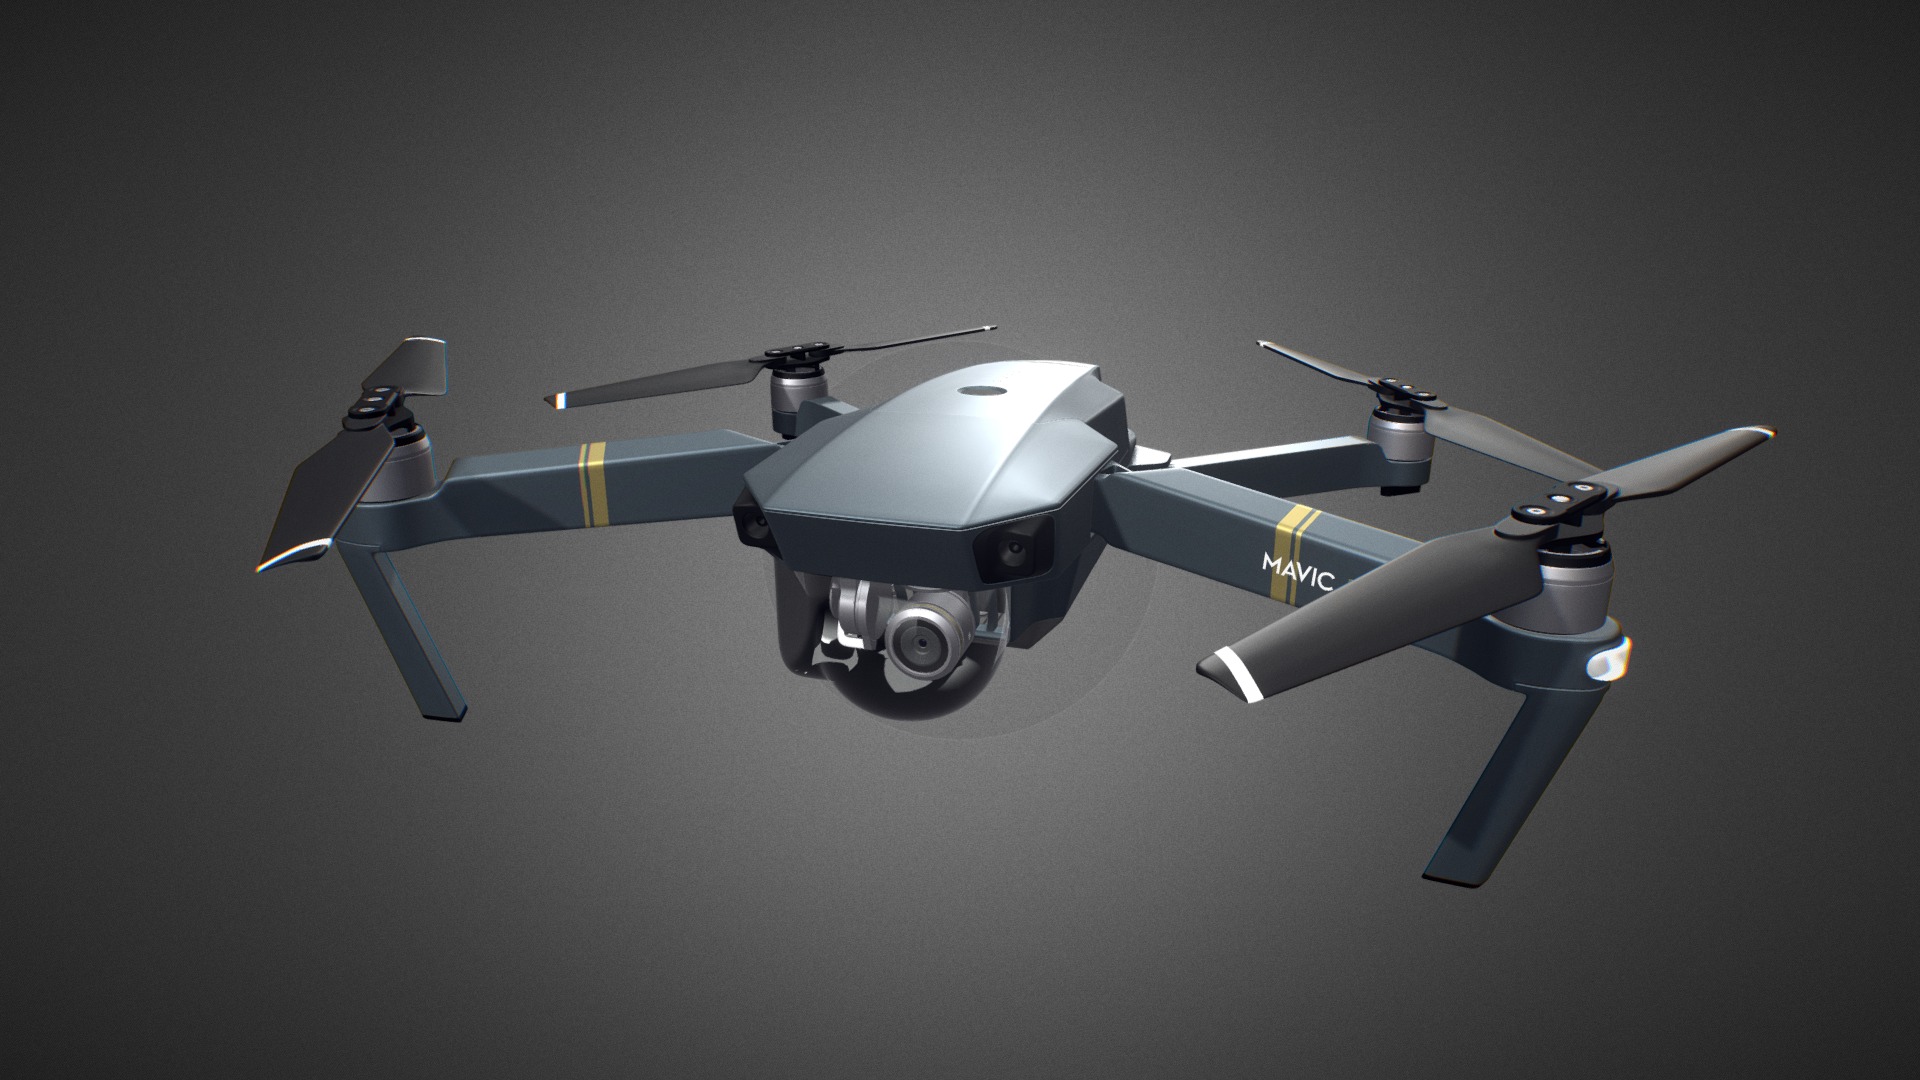 3D model DJI Mavic Pro for Element 3D - This is a 3D model of the DJI Mavic Pro for Element 3D. The 3D model is about a drone flying in the air.